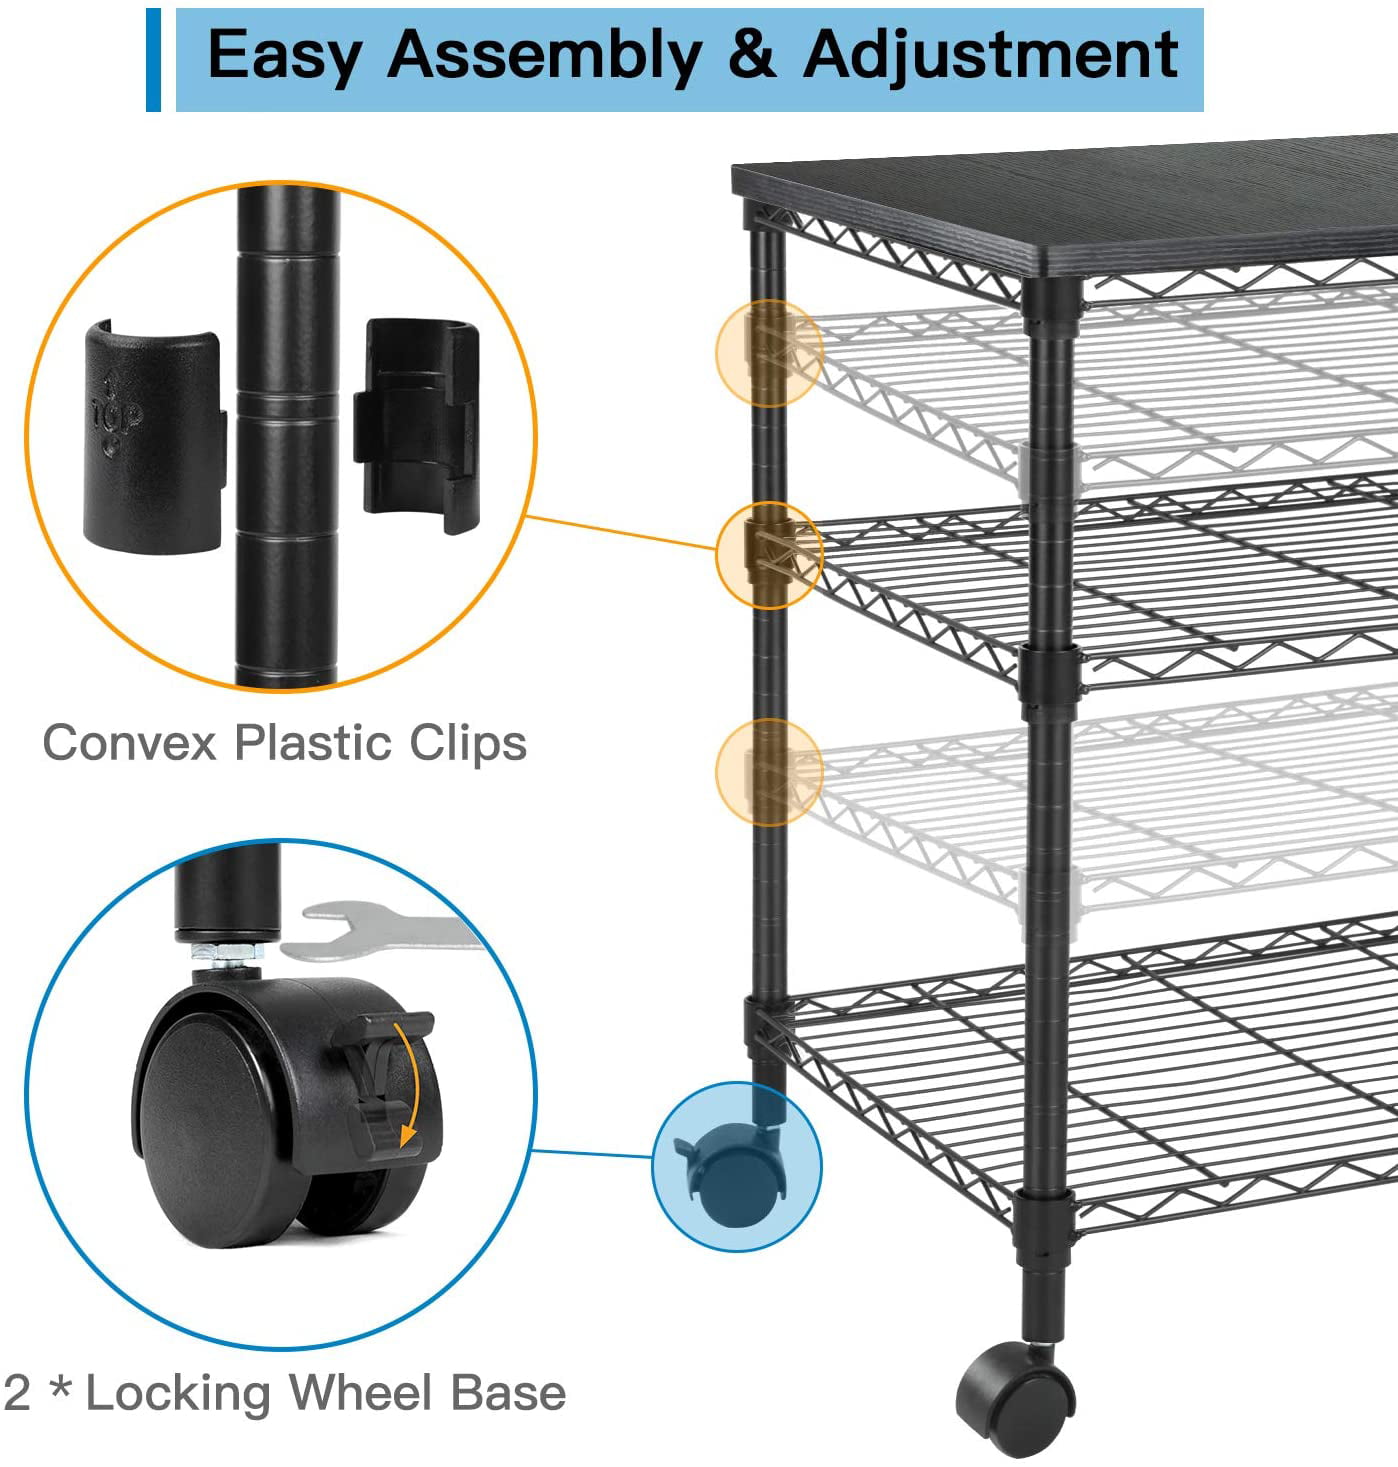 Multifunctional Metal Utility Shelves Workspace Desk Organizer Rolling Cart for Home & Office Use Holds up to 200lbs HUANUO Printer Stand 3 Tier Printer Cart for Storage HNPS01